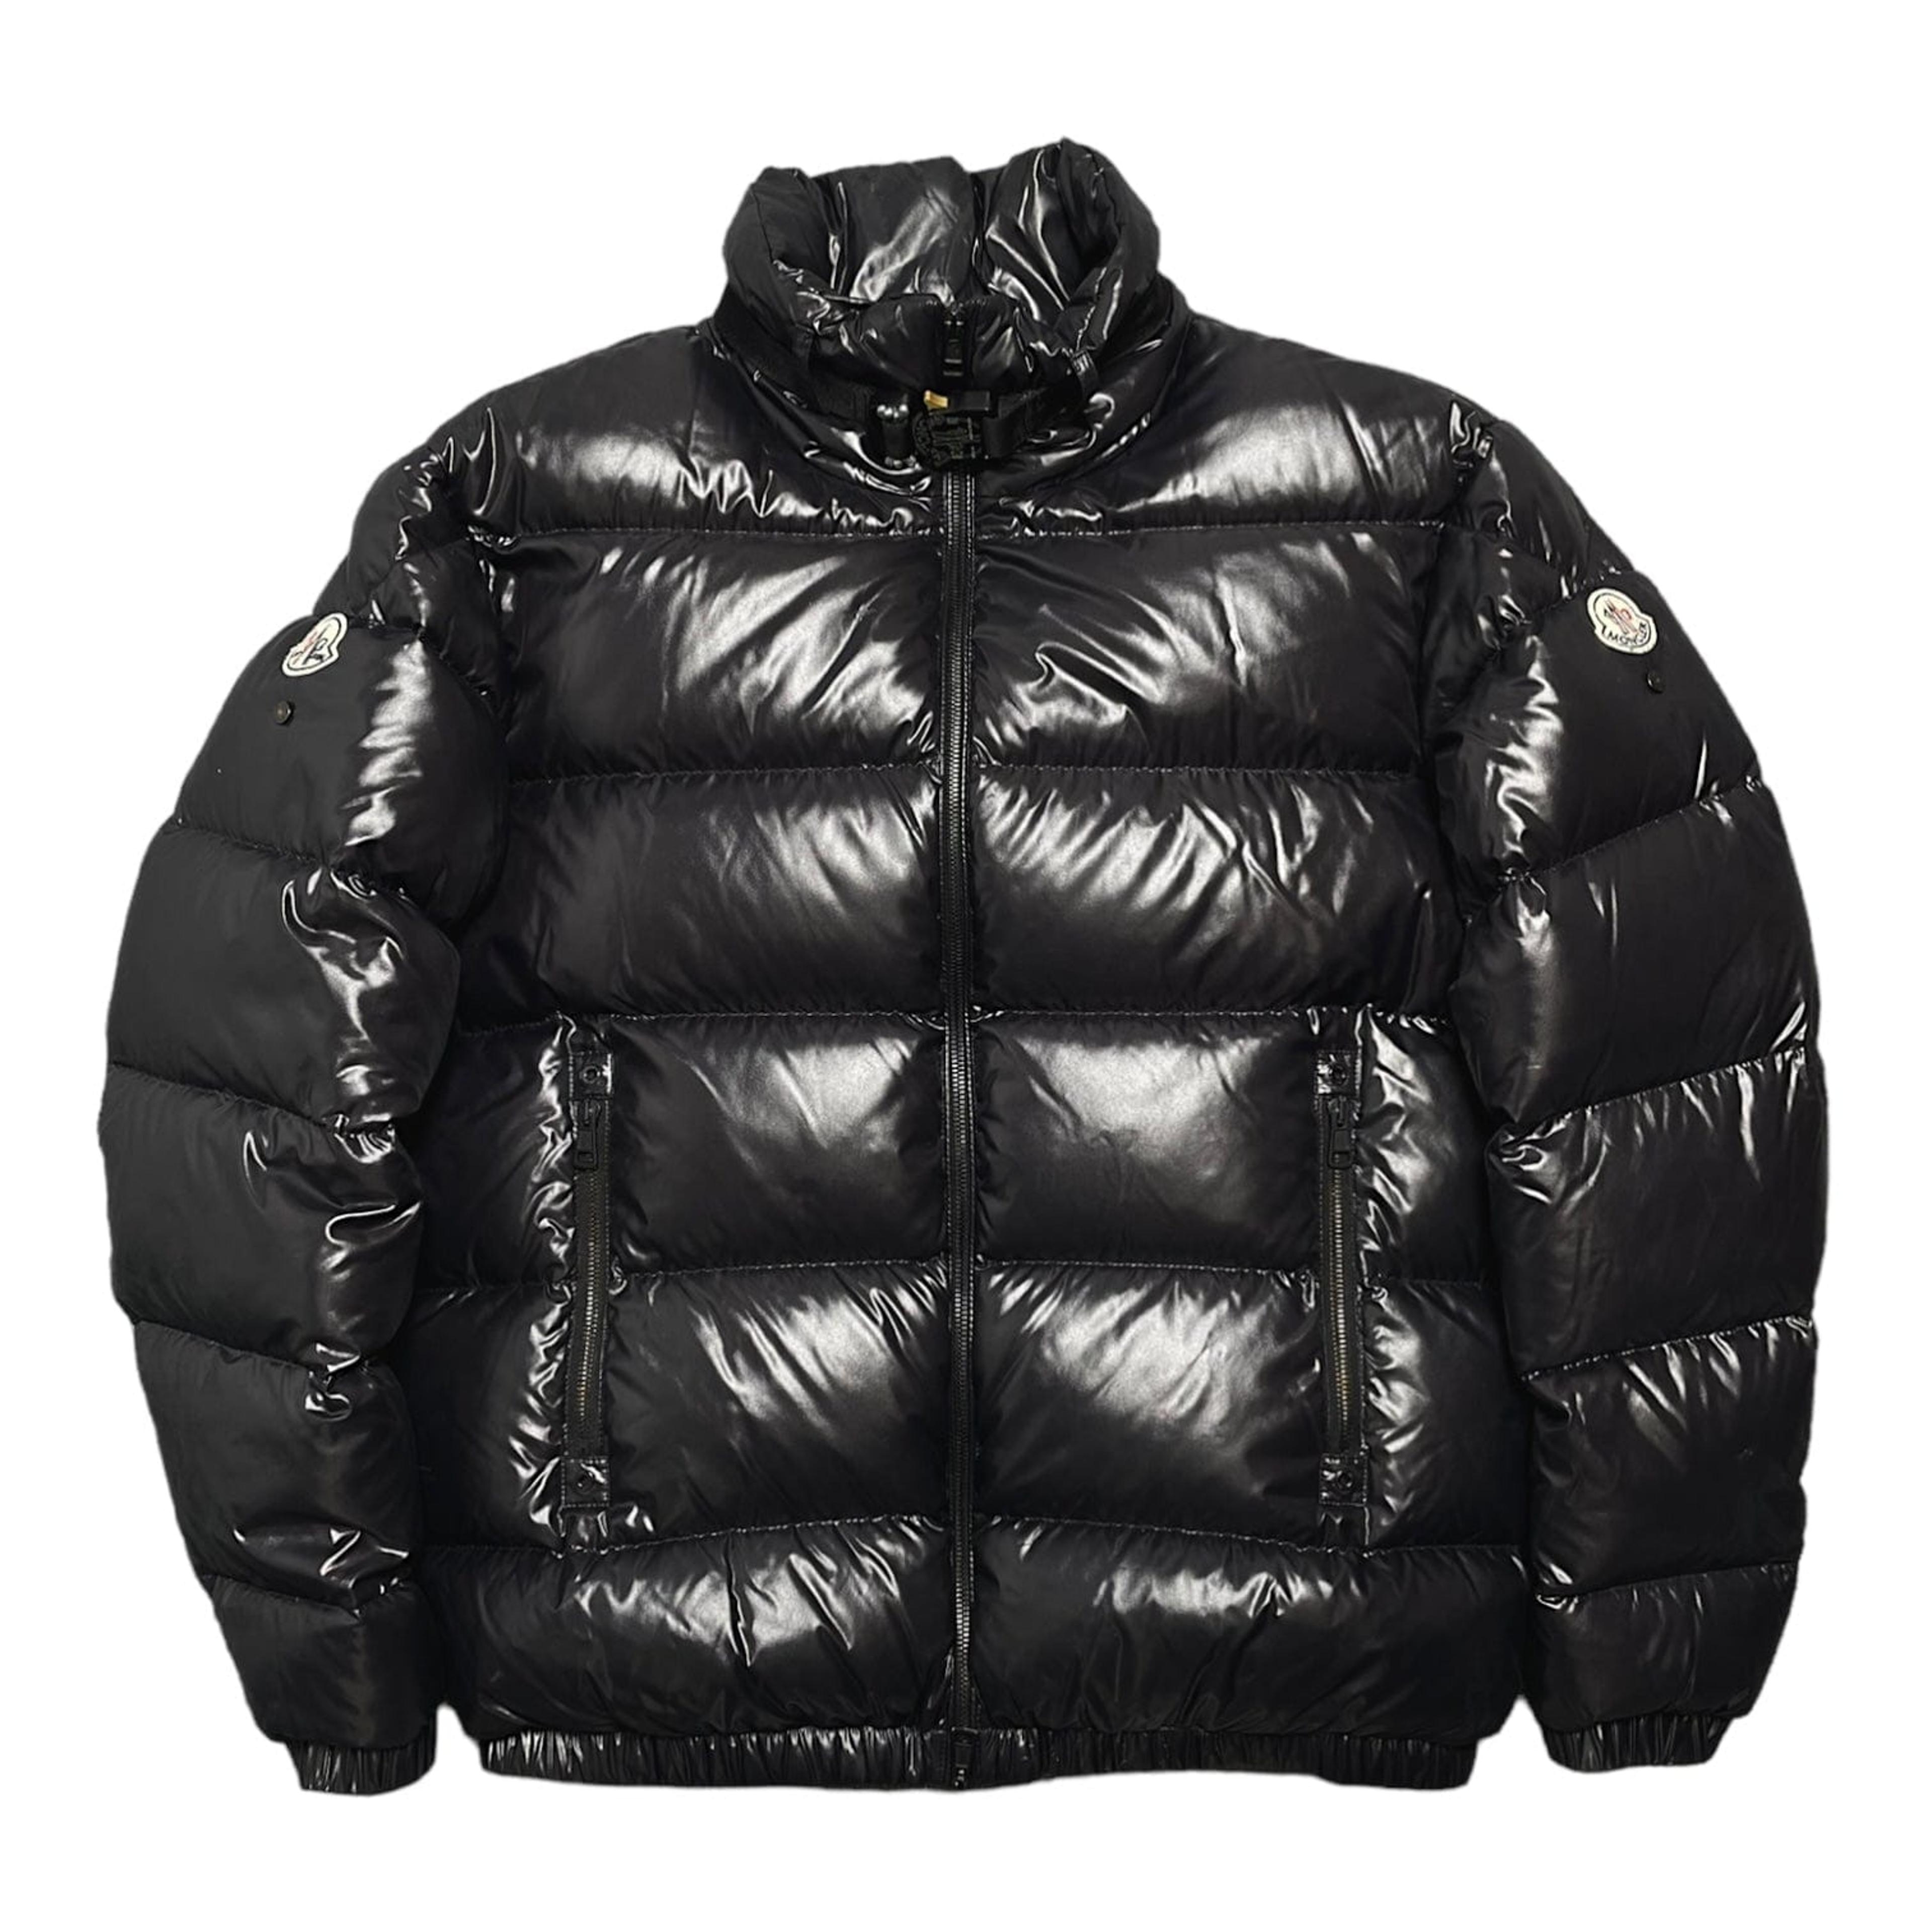 Moncler x 1017 ALYX 9SM Sirus Down Jacket Black Pre-Owned